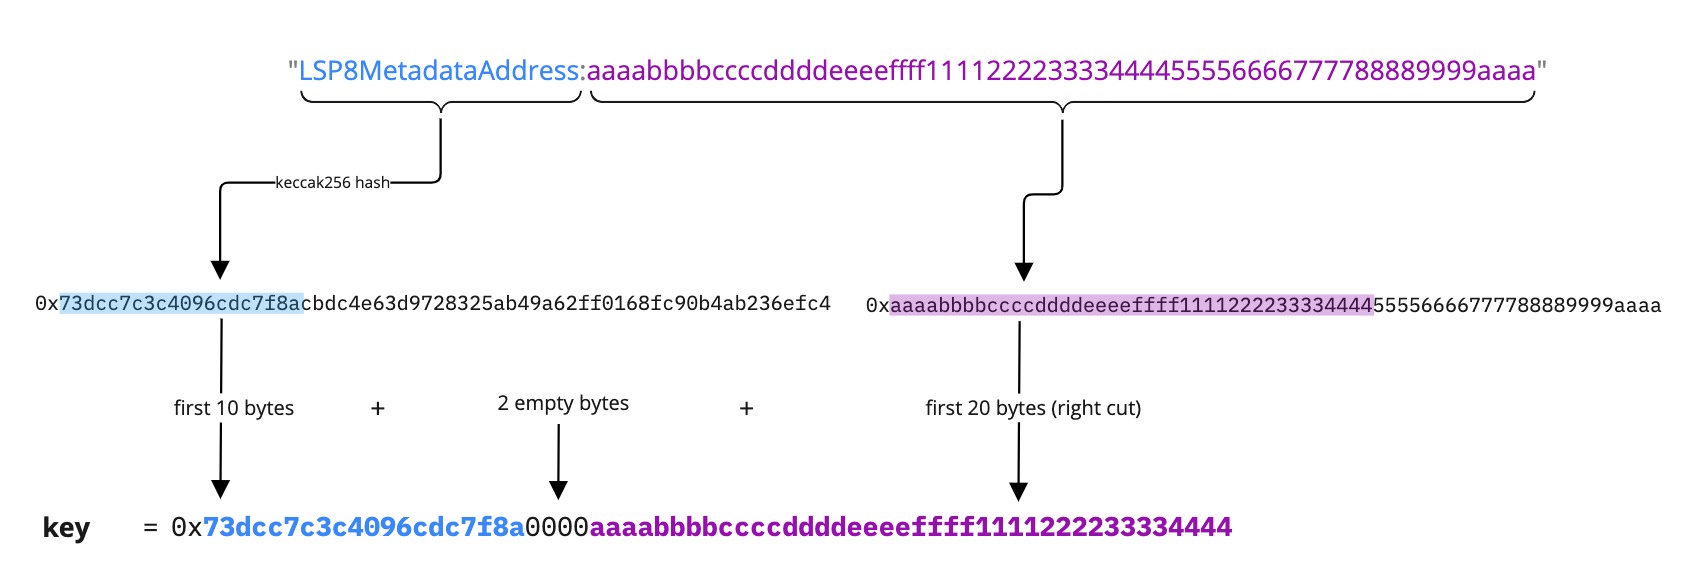 LSP2 Mapping key type to bytes32